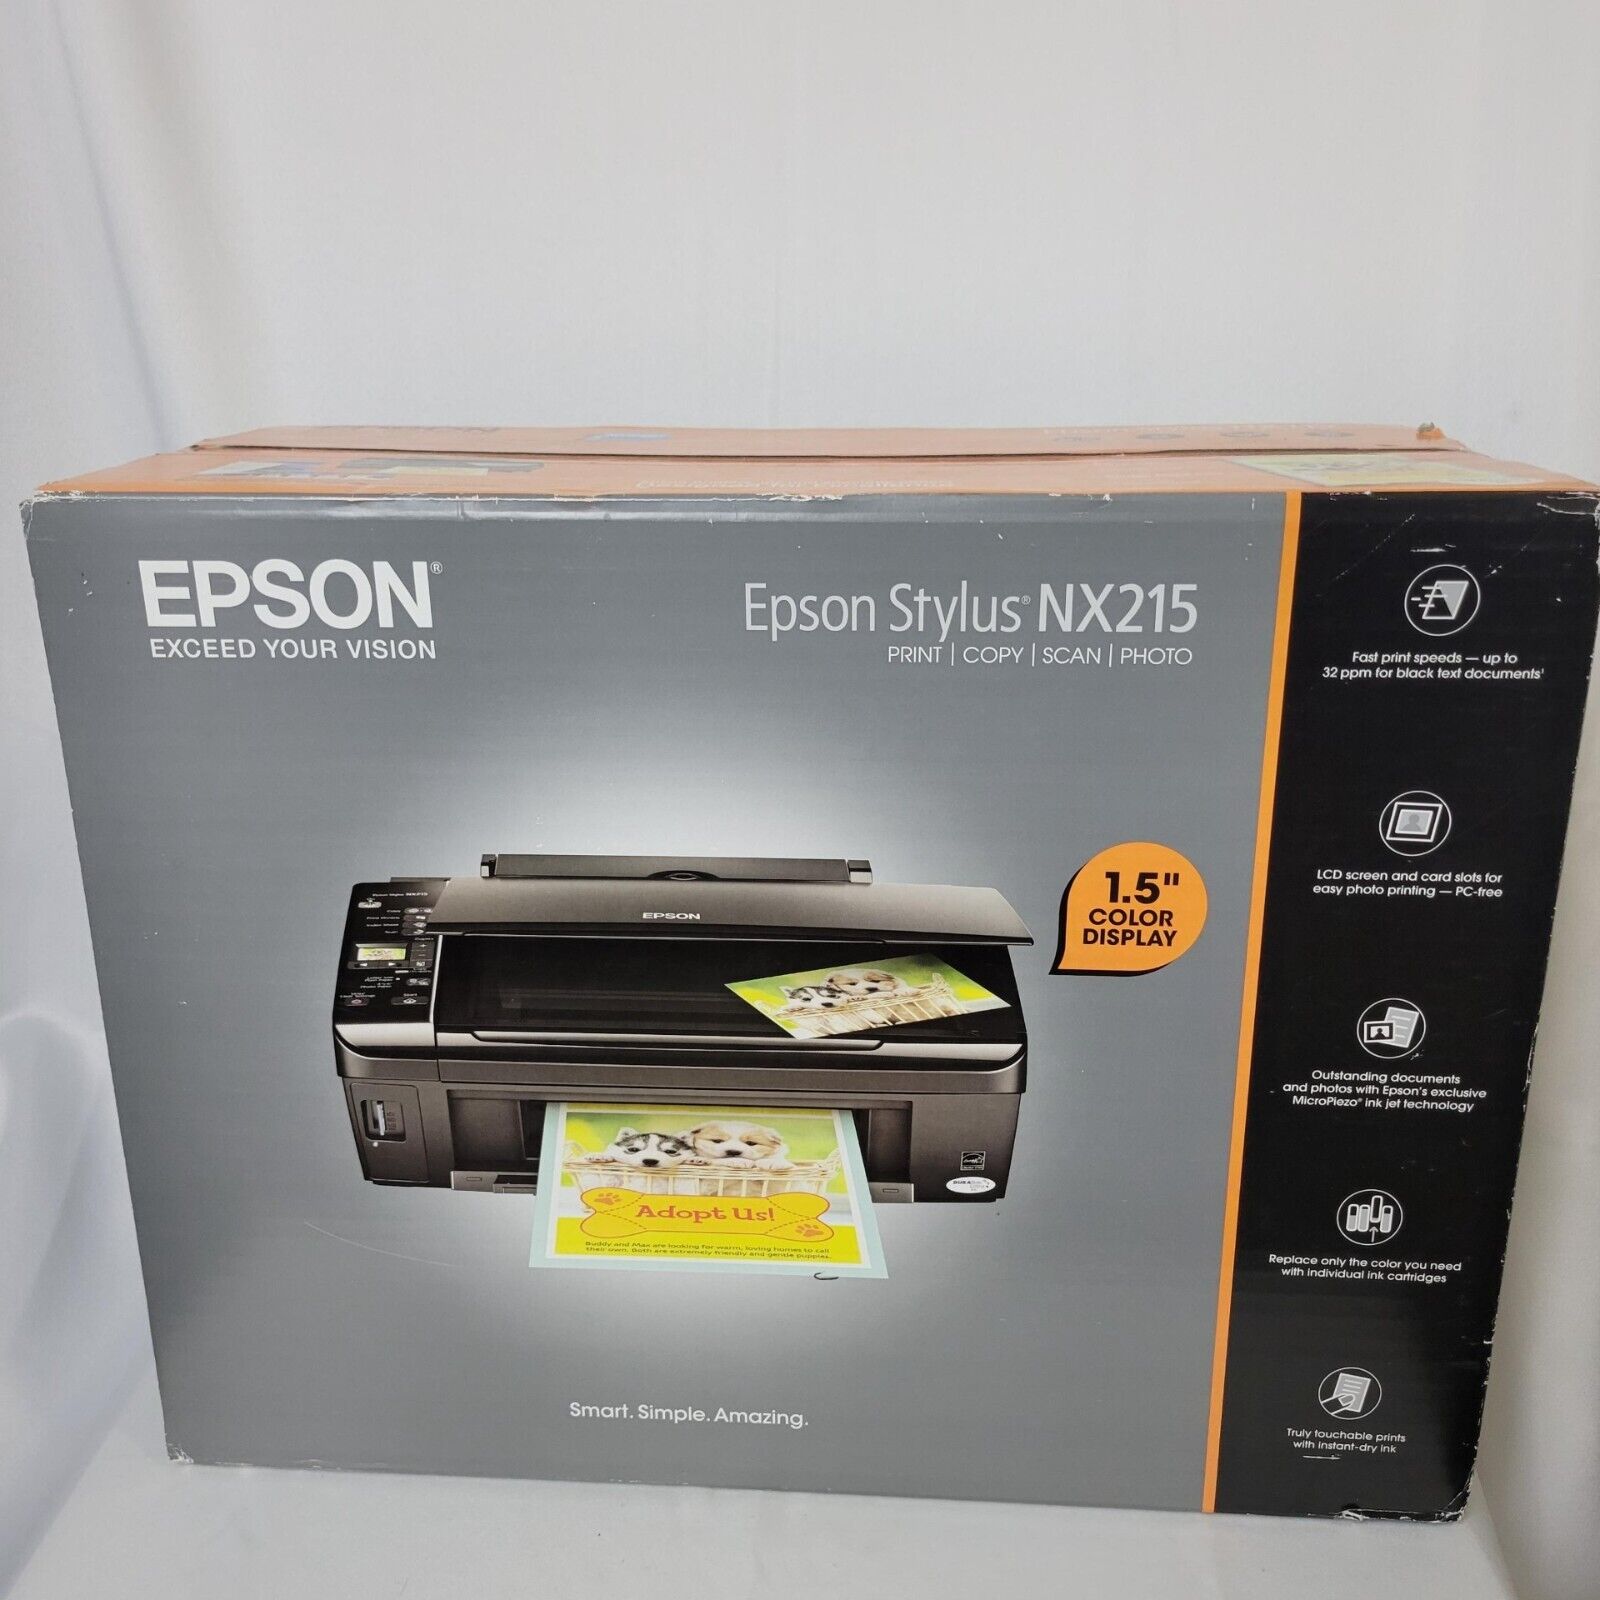 Epson Printer All in One Stylus NX215 Print Copy Scan Photo New Sealed NOS